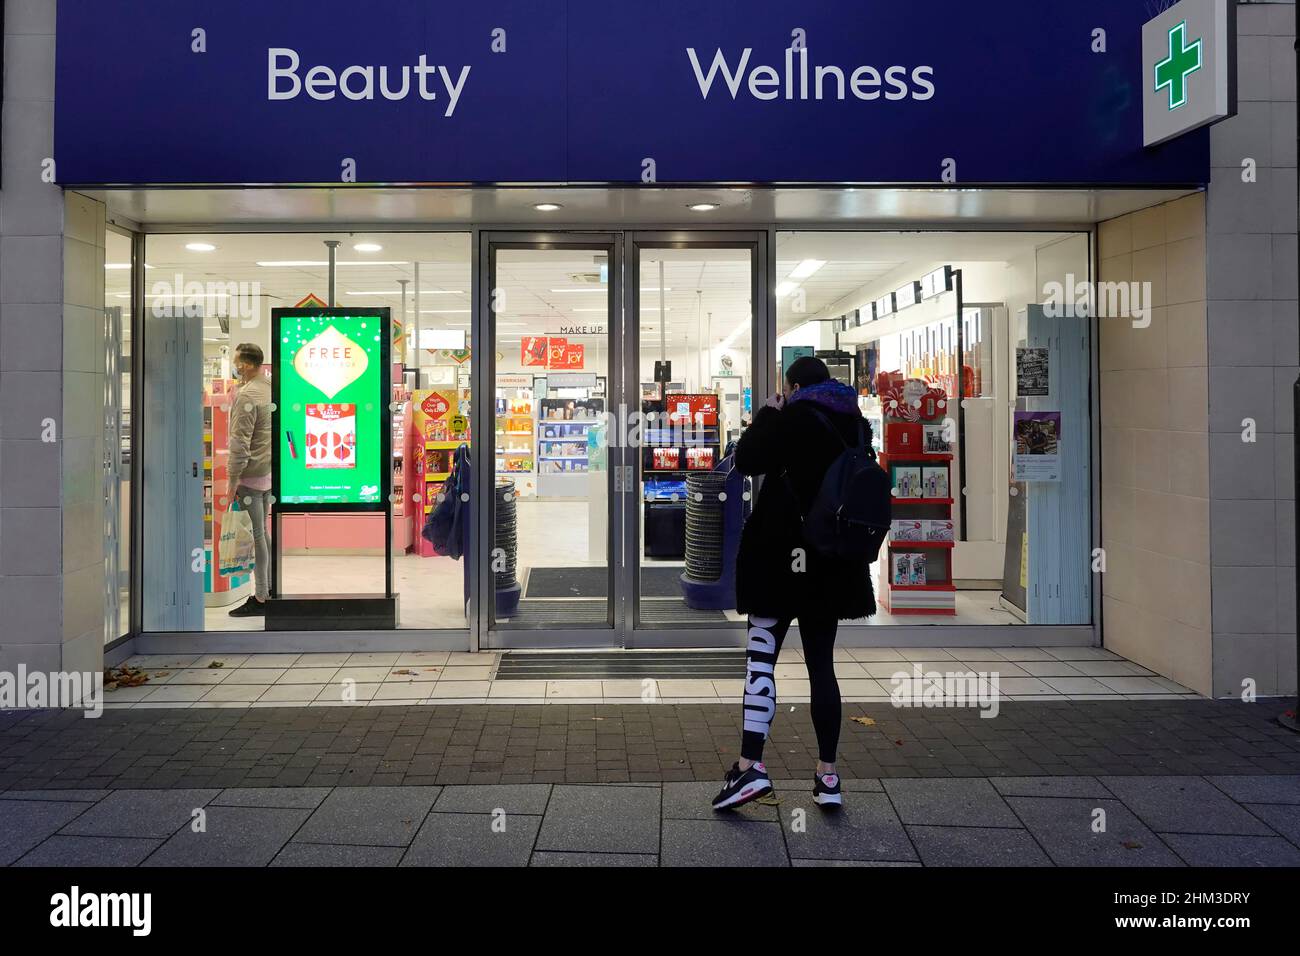 Boots Beauty Wellness store in shopping high street woman customer outside shopfront on pavement a dusk afternoon view at Christmas time England UK Stock Photo